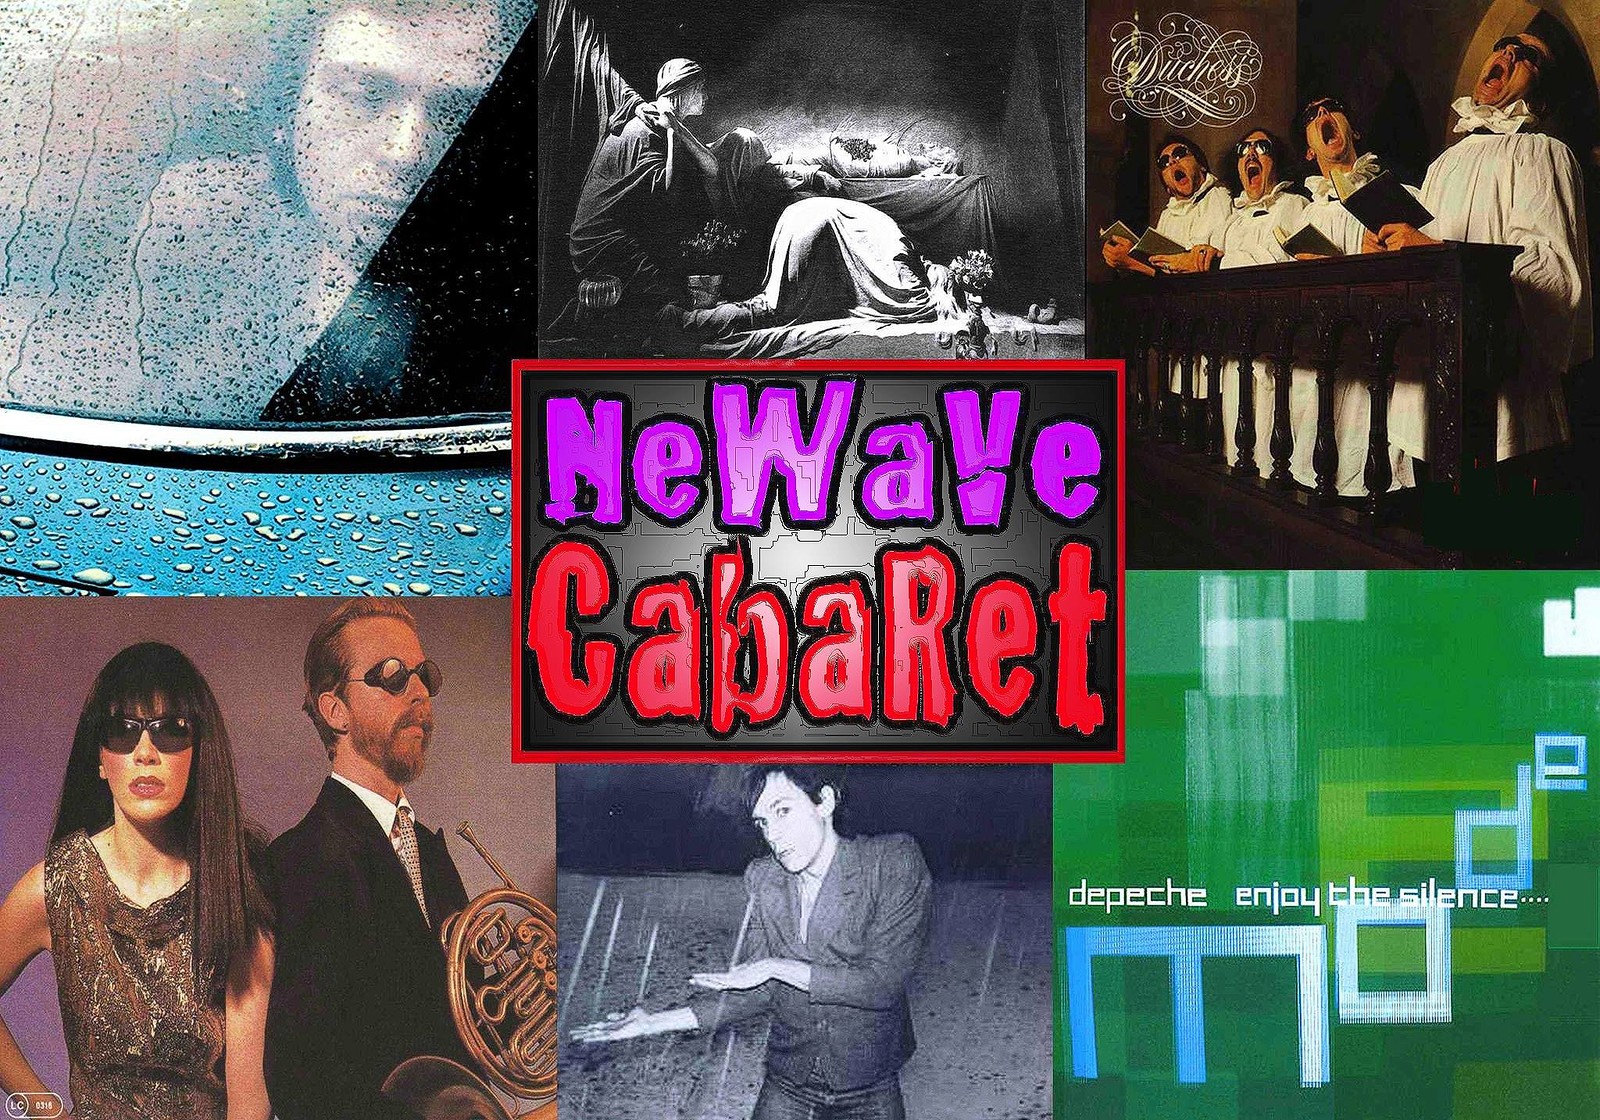 New Wave Cabaret at The Tobacco Factory